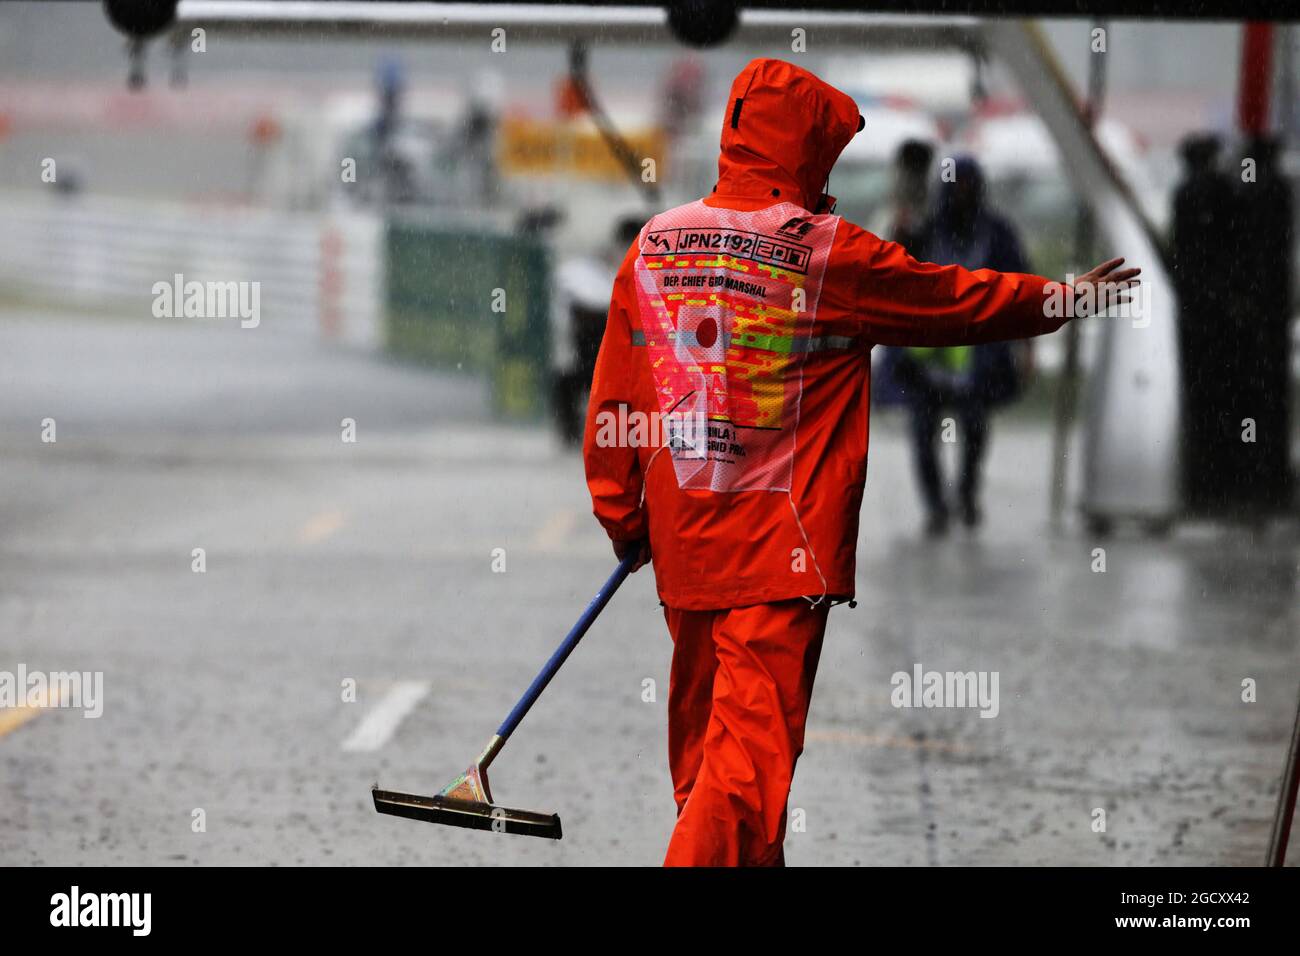 A marshal in a wet and rainy paddock. Japanese Grand Prix, Friday 6th October 2017. Suzuka, Japan. Stock Photo